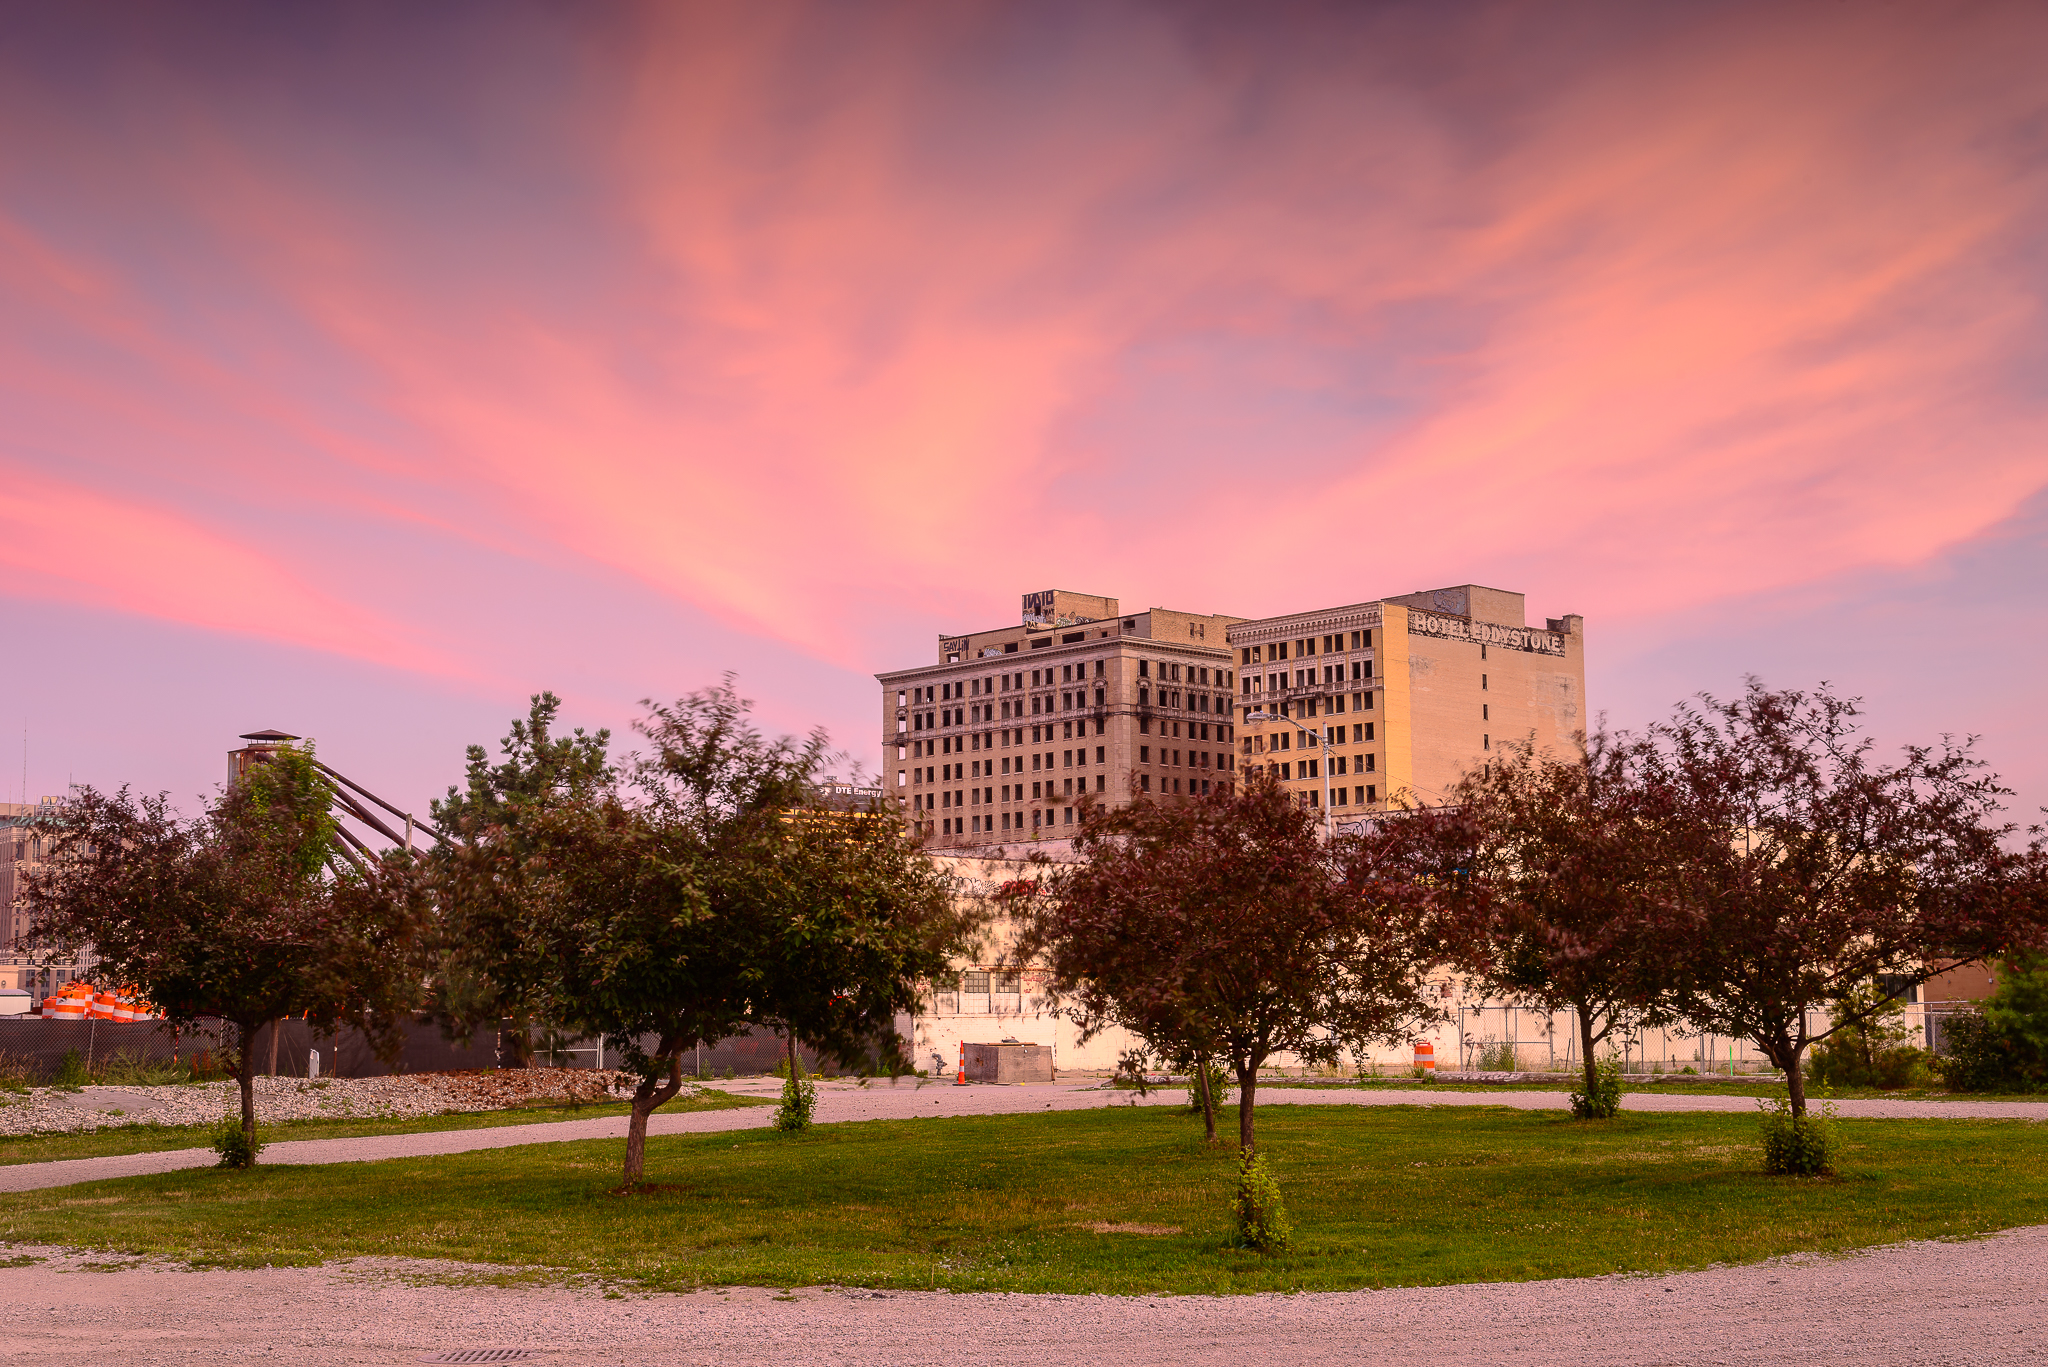  7/10/15.&nbsp; A fitting final sunset over the Hotel Park Ave.&nbsp; Implosion less than 12 hours away.&nbsp; 